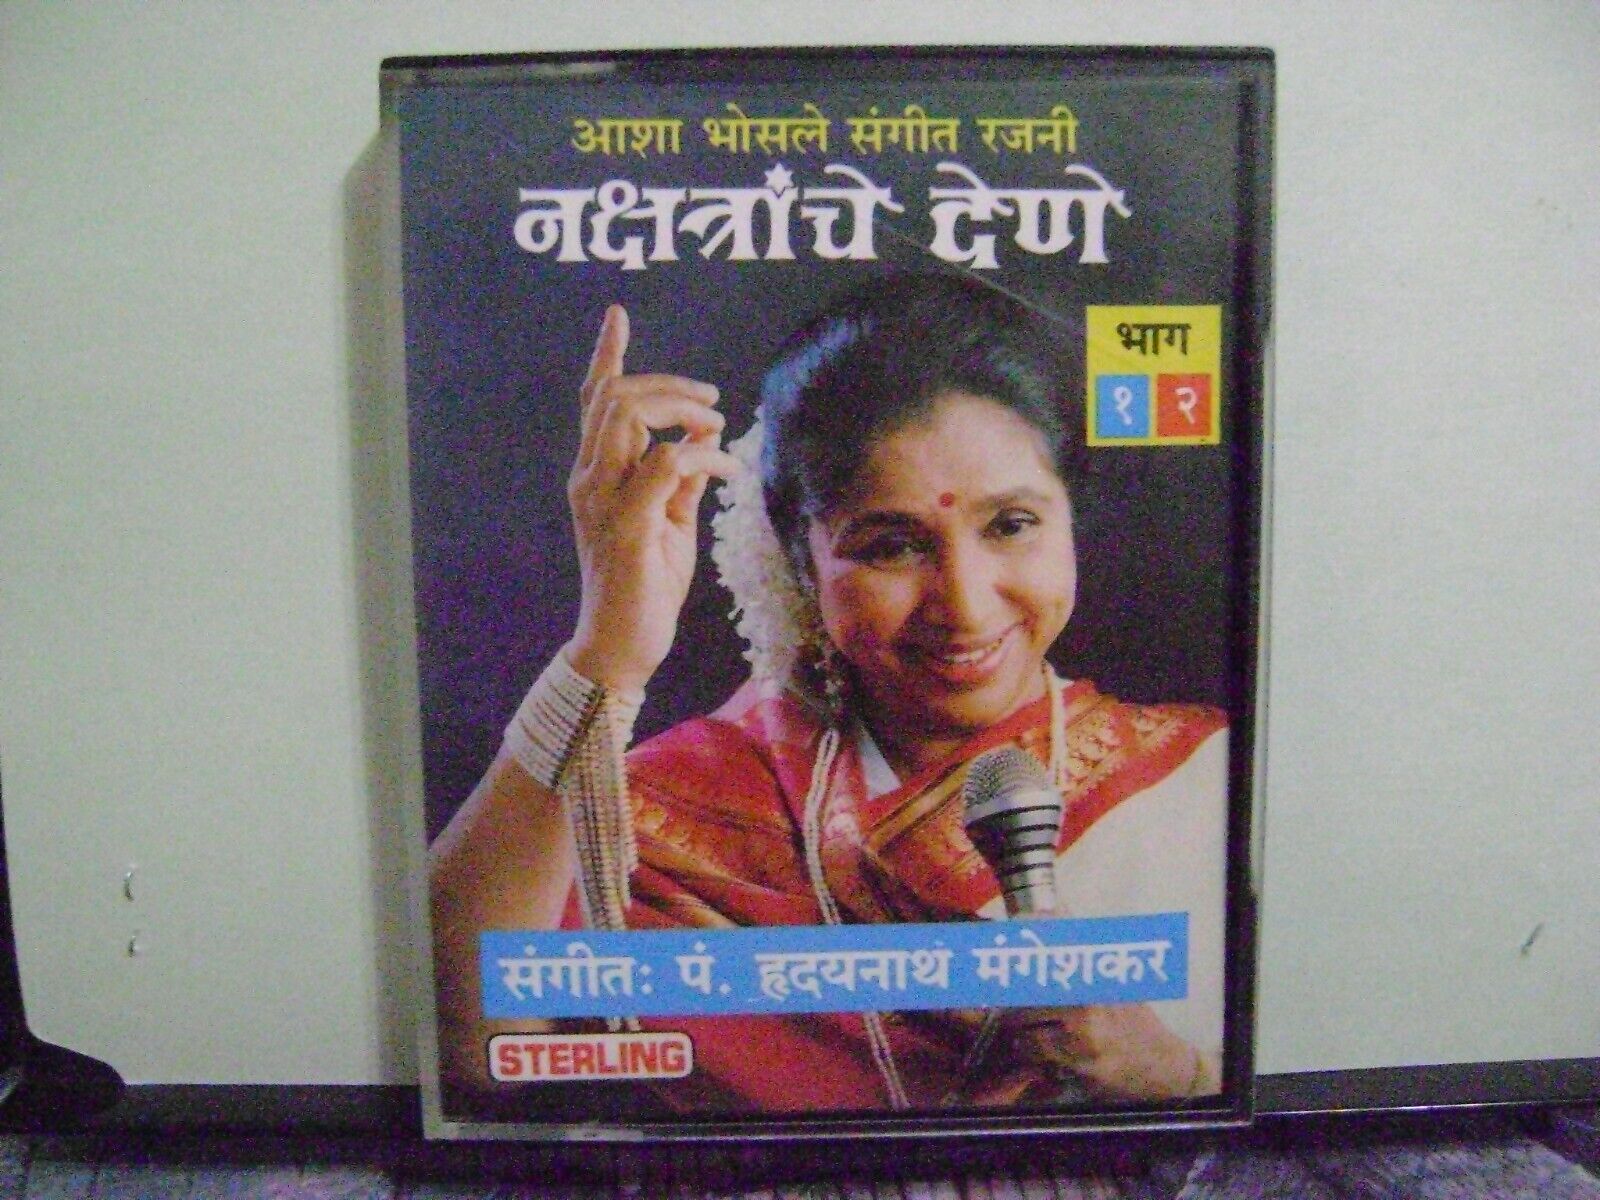 INDIA MUSIC CASSETTES LOT OF 2...STERLING RECORDINGS...COULD NOT TRANSLATE!!!